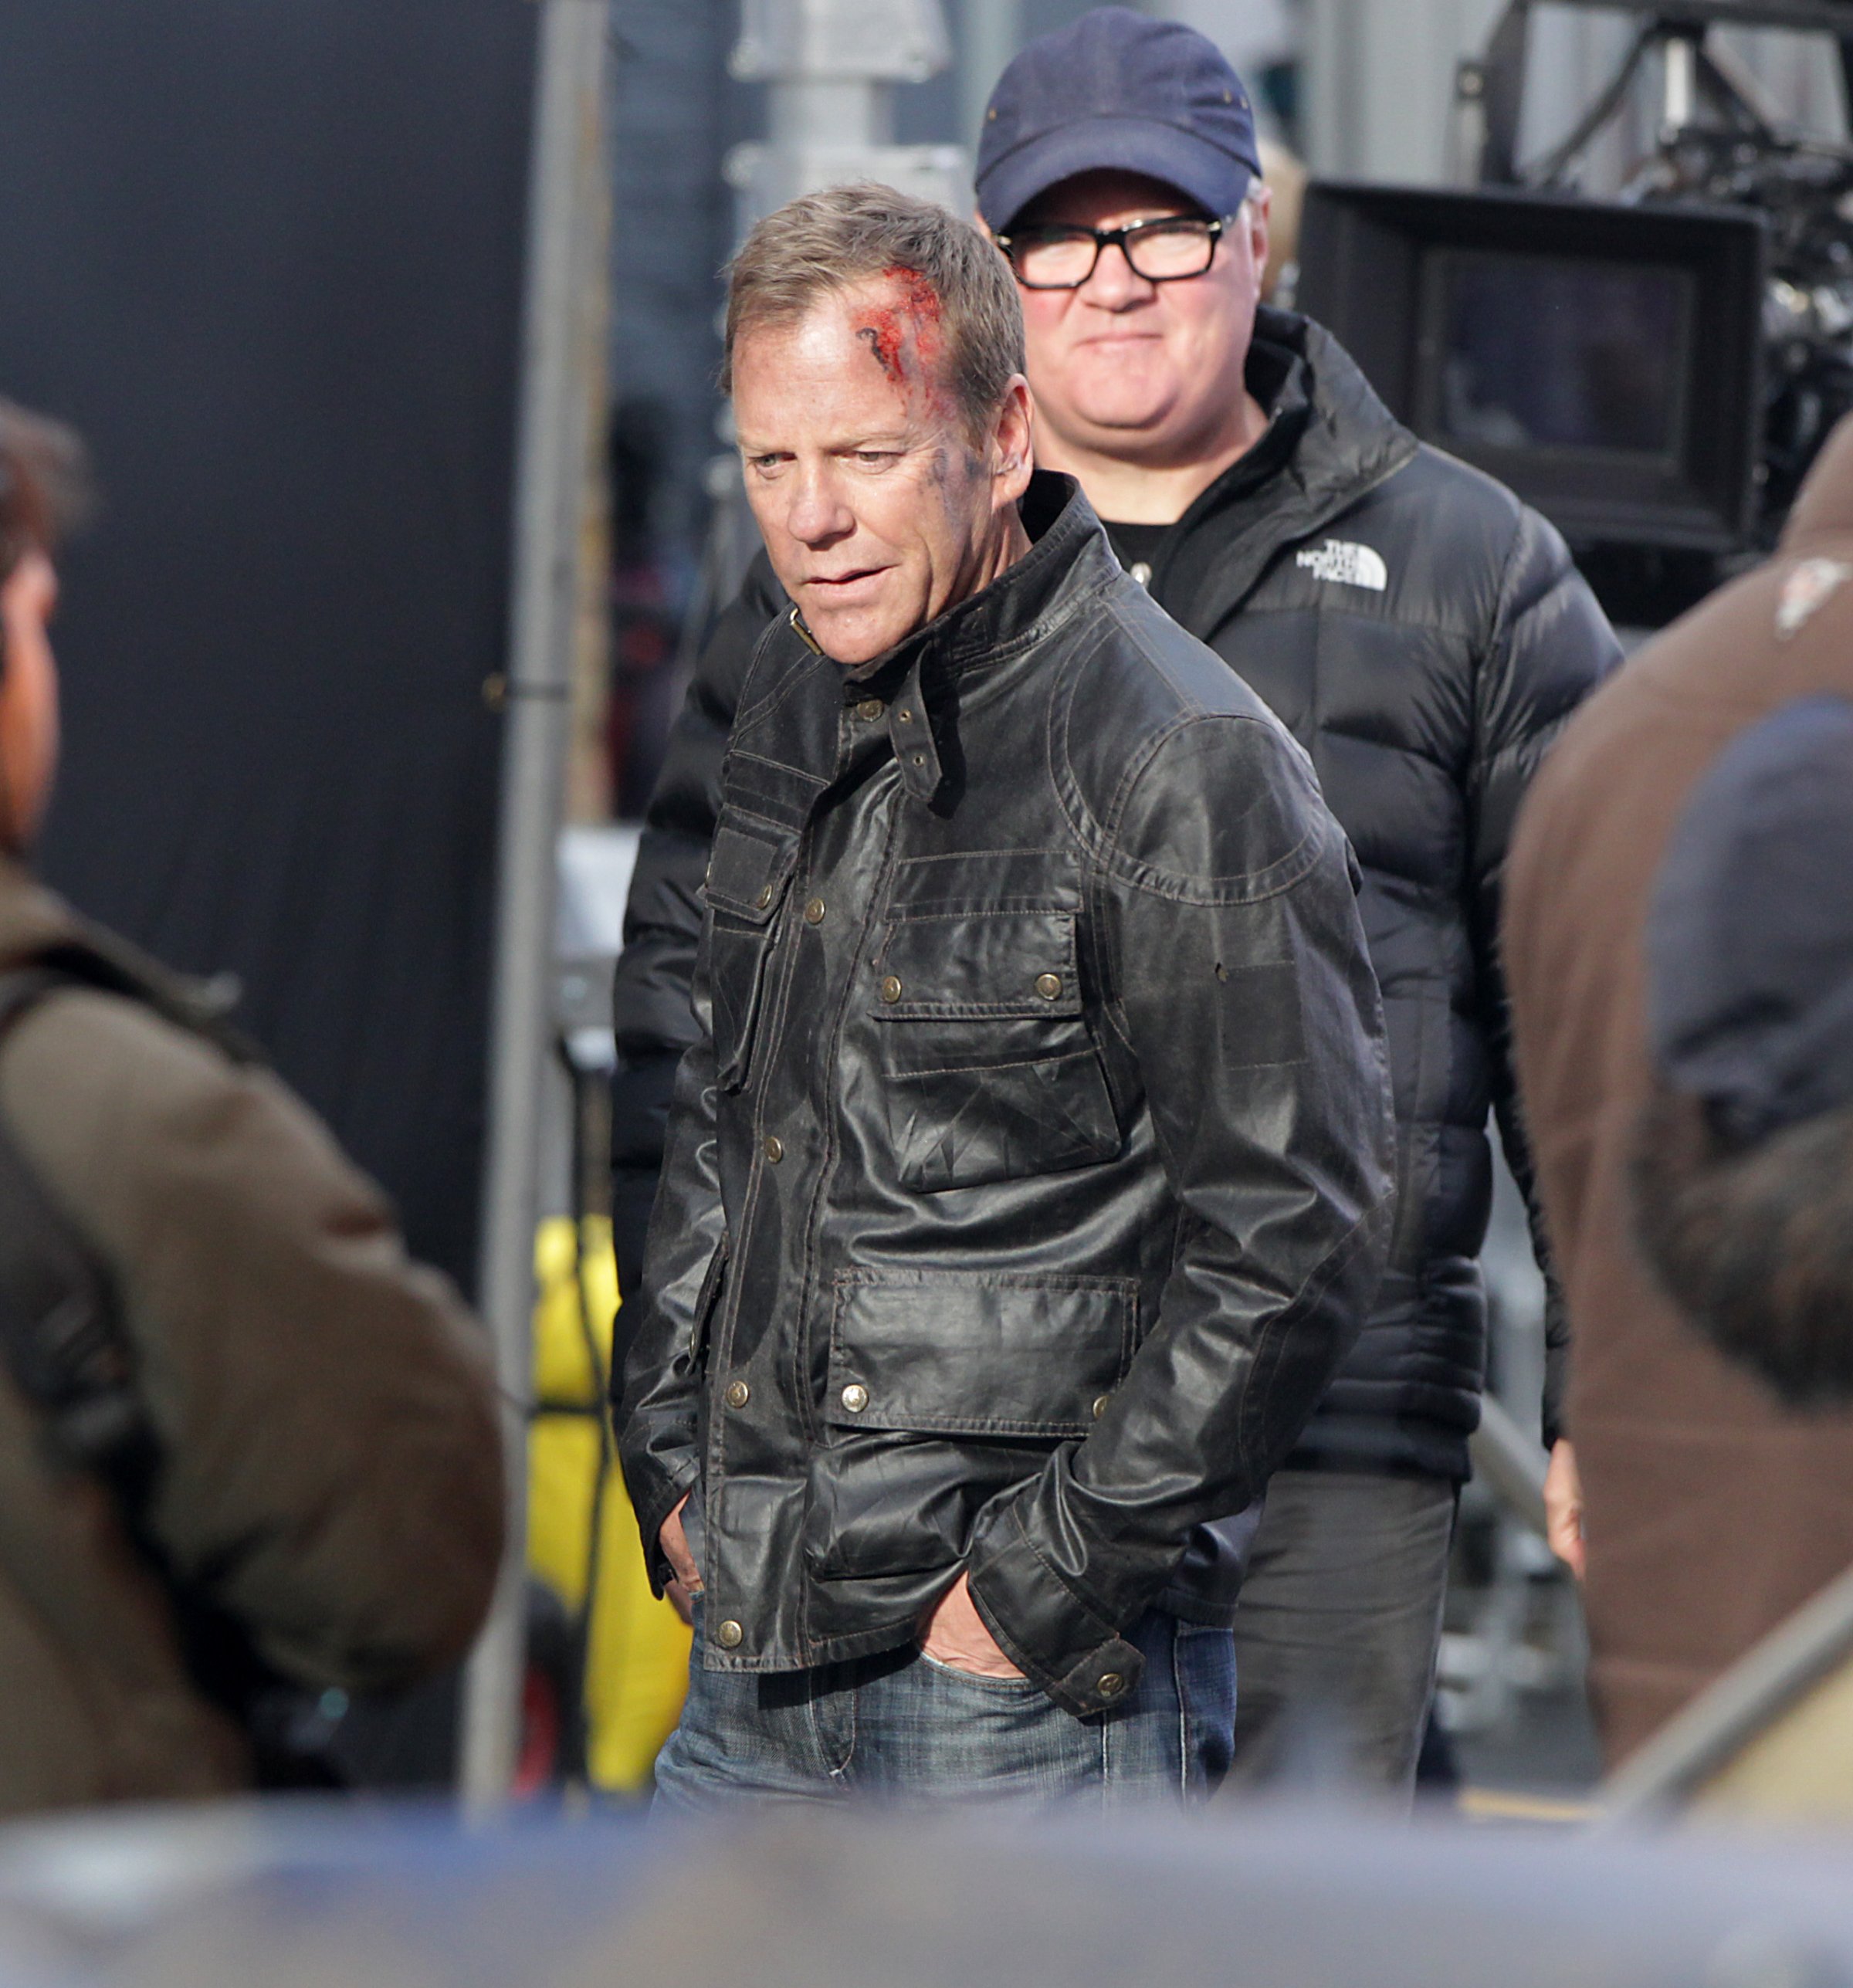 Kiefer Sutherland films scenes for 24: Live Another Day in London on Jan. 22, 2014.